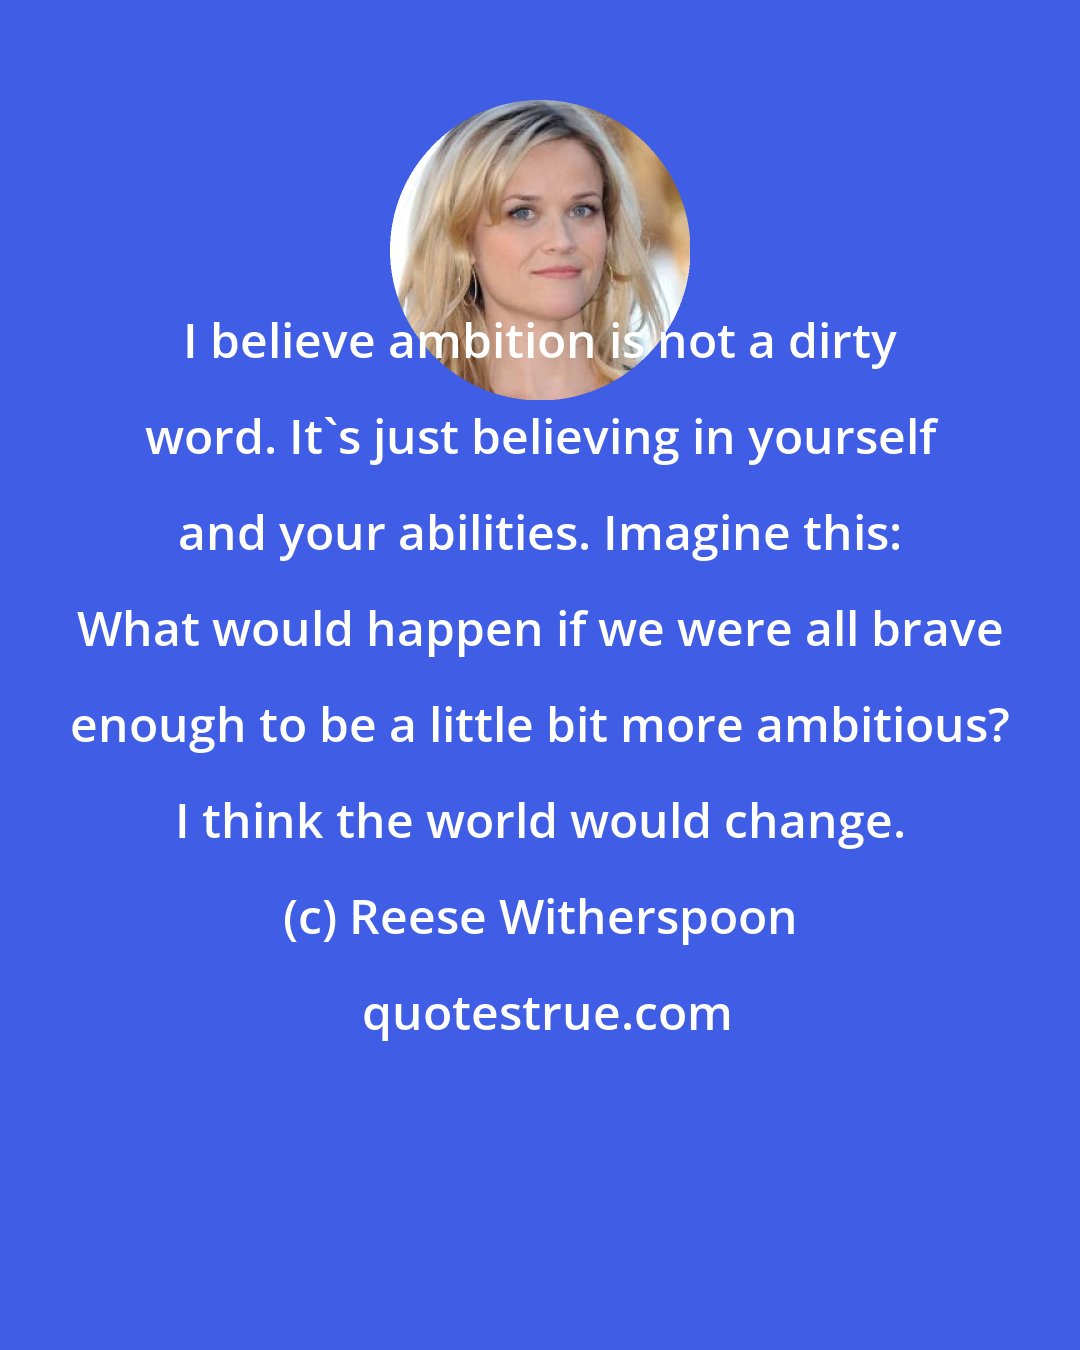 Reese Witherspoon: I believe ambition is not a dirty word. It's just believing in yourself and your abilities. Imagine this: What would happen if we were all brave enough to be a little bit more ambitious? I think the world would change.